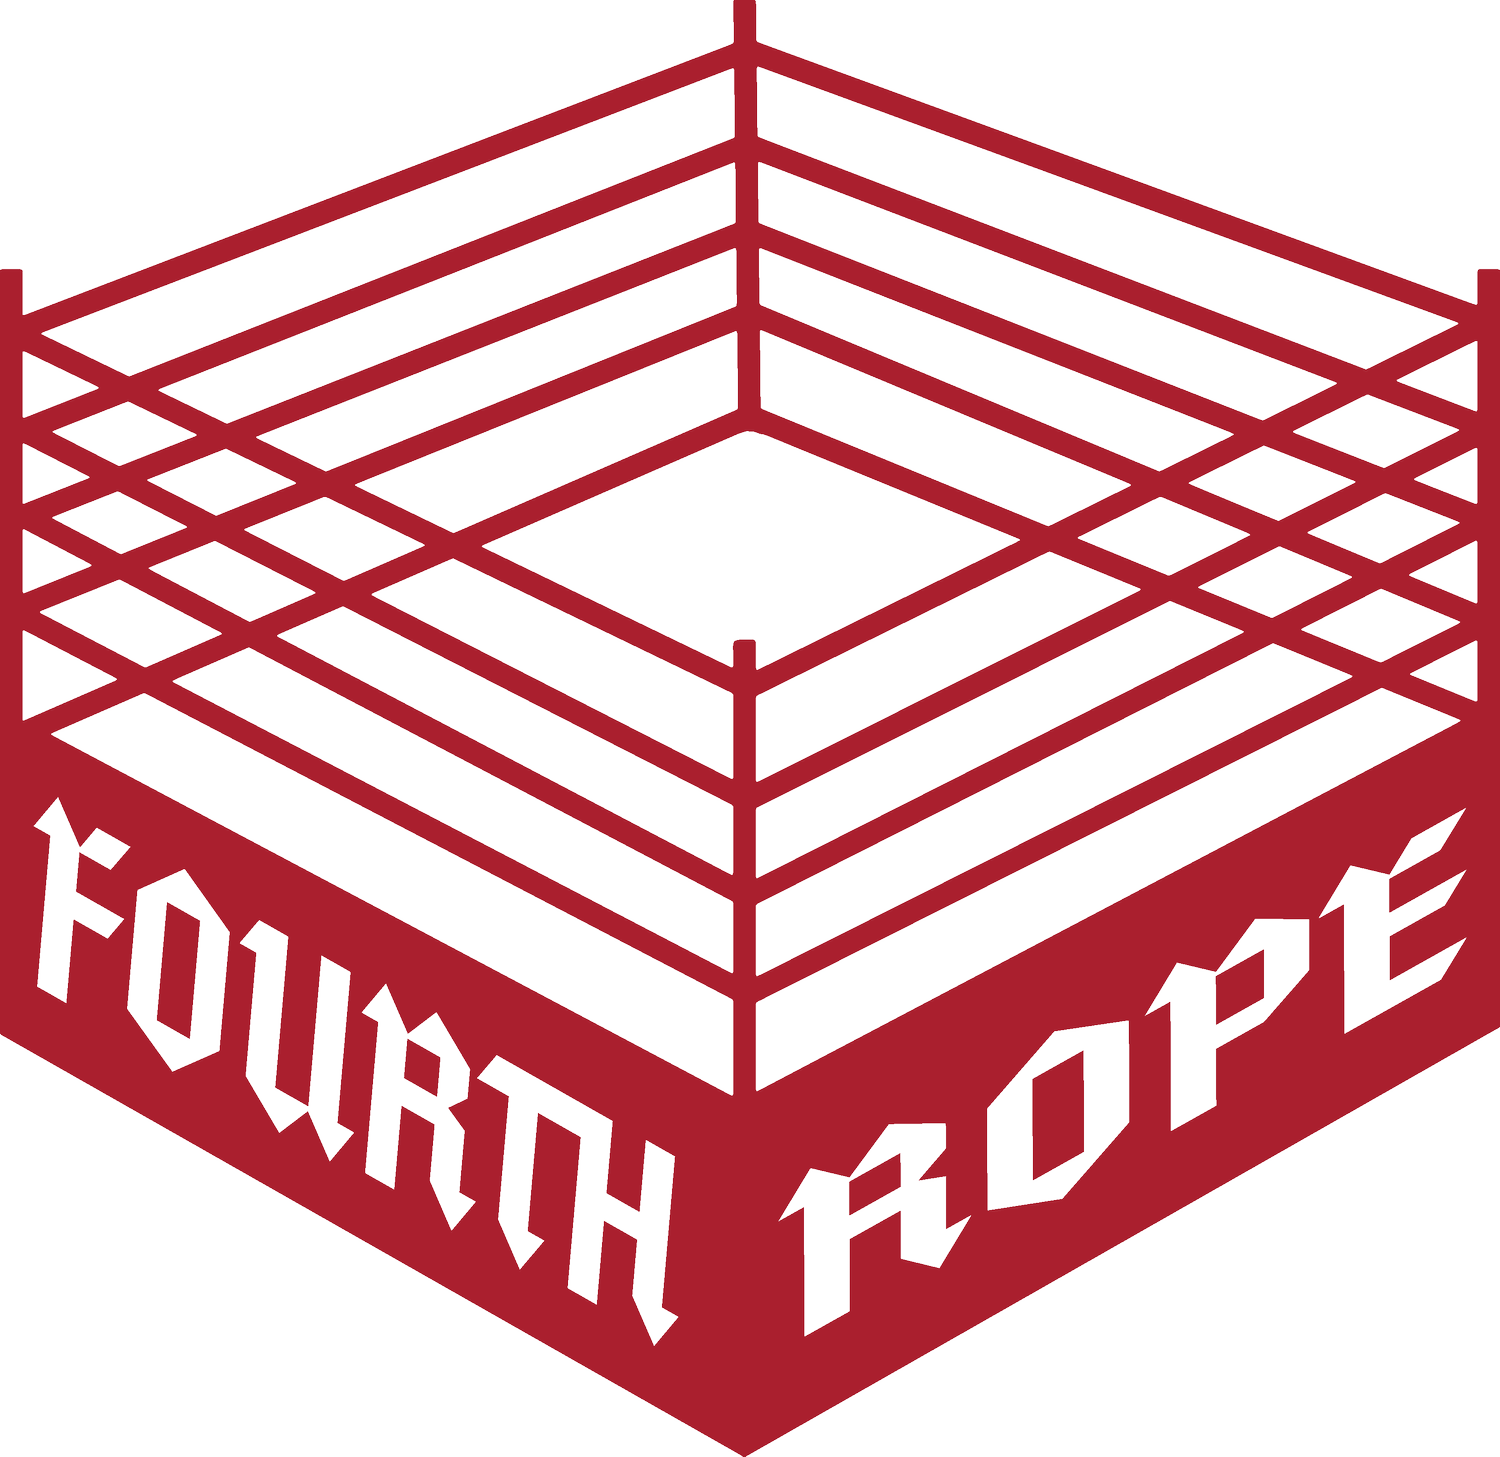 4TH ROPE